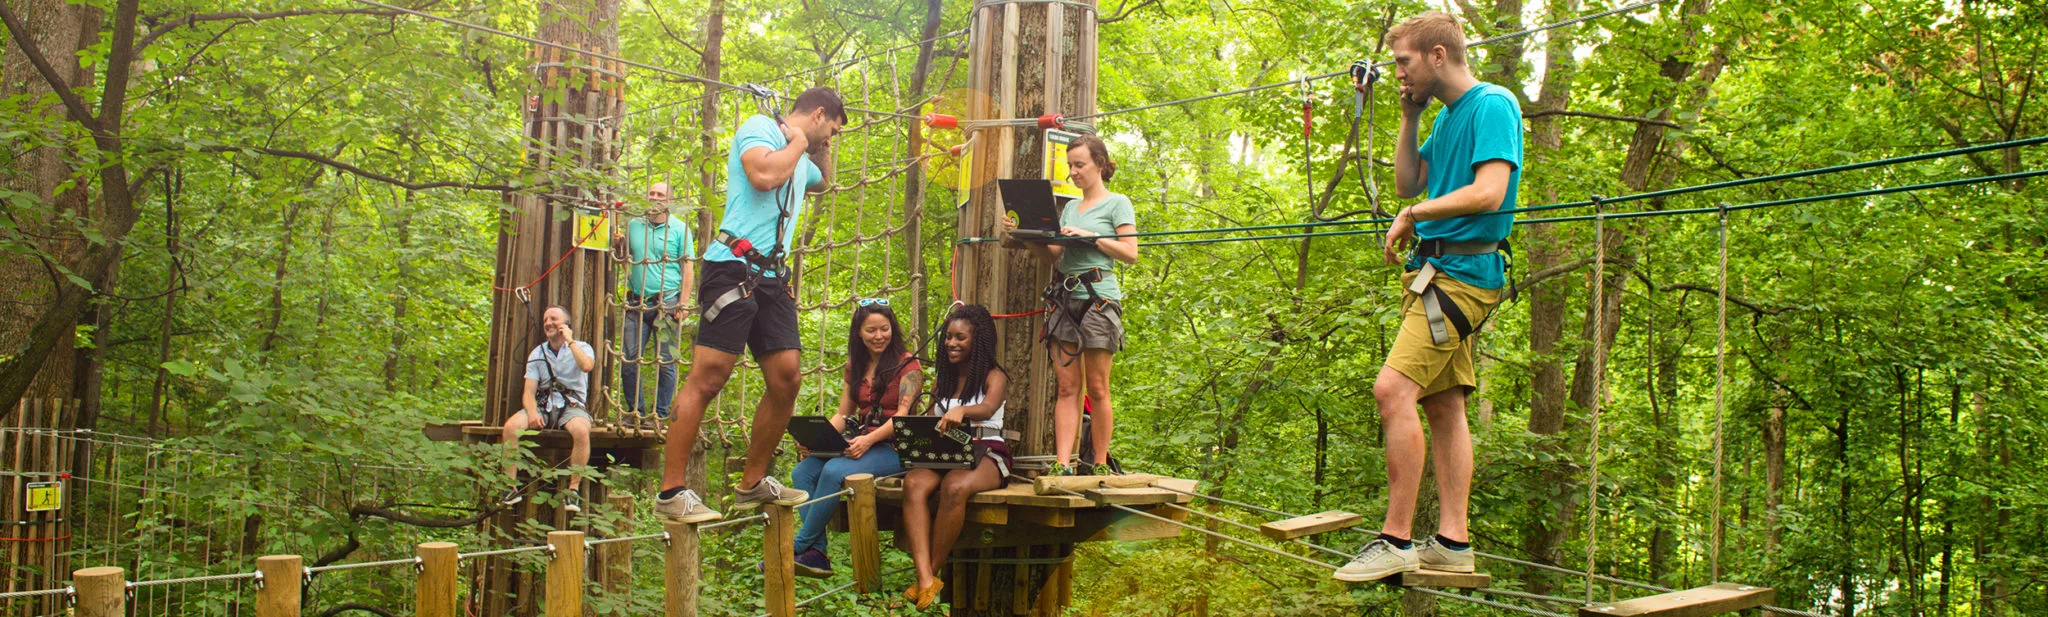 Go Ape employees hanging out in trees